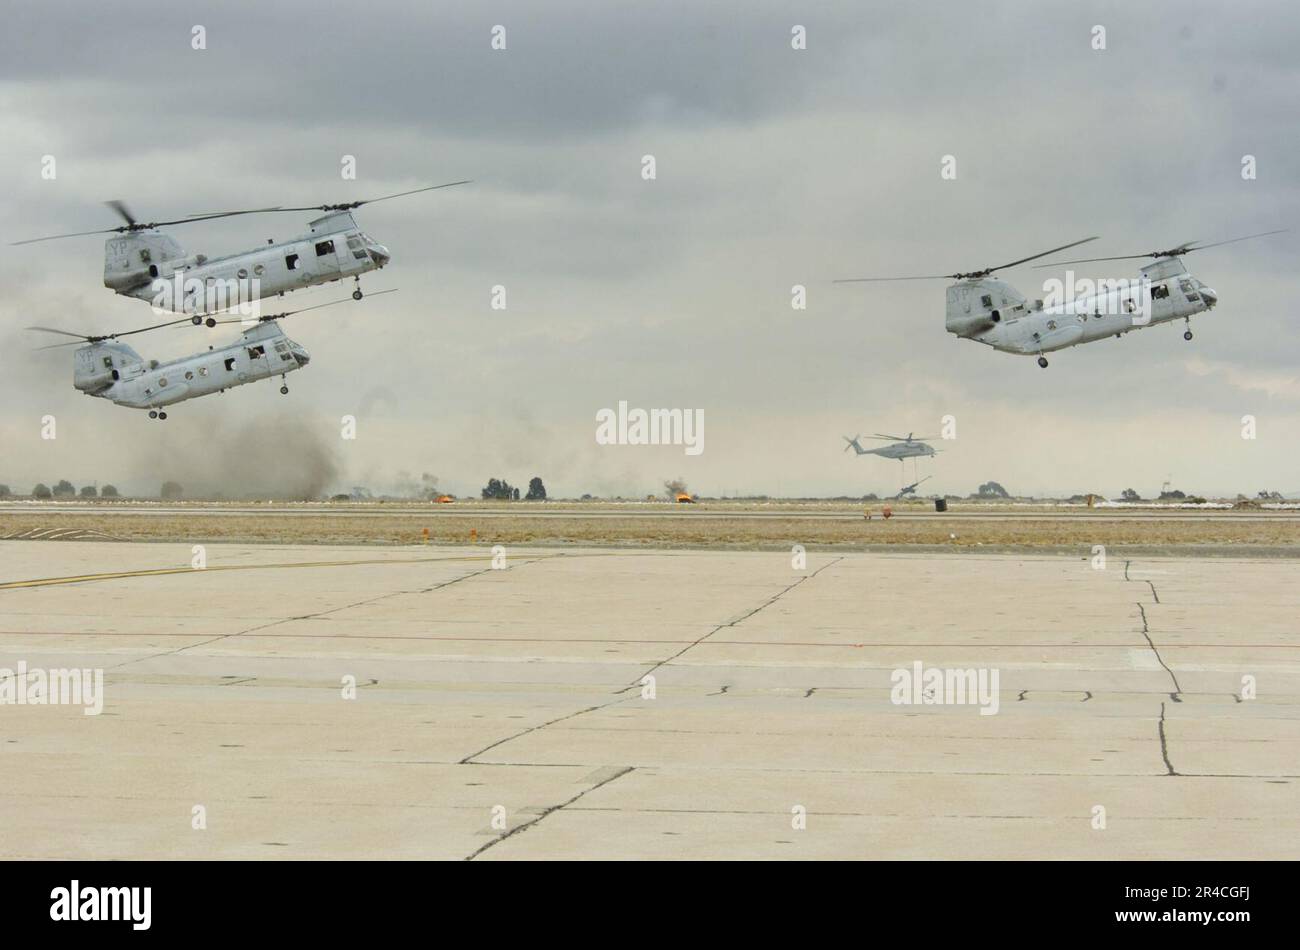 US Navy  Three U.S. Marine Corps CH-46E Sea Knight helicopters, assigned to Marine Medium Helicopter Squadron One Six Six (HMM-163) provides support during the Air show's Marine Air-ground Task Force (MA. Stock Photo